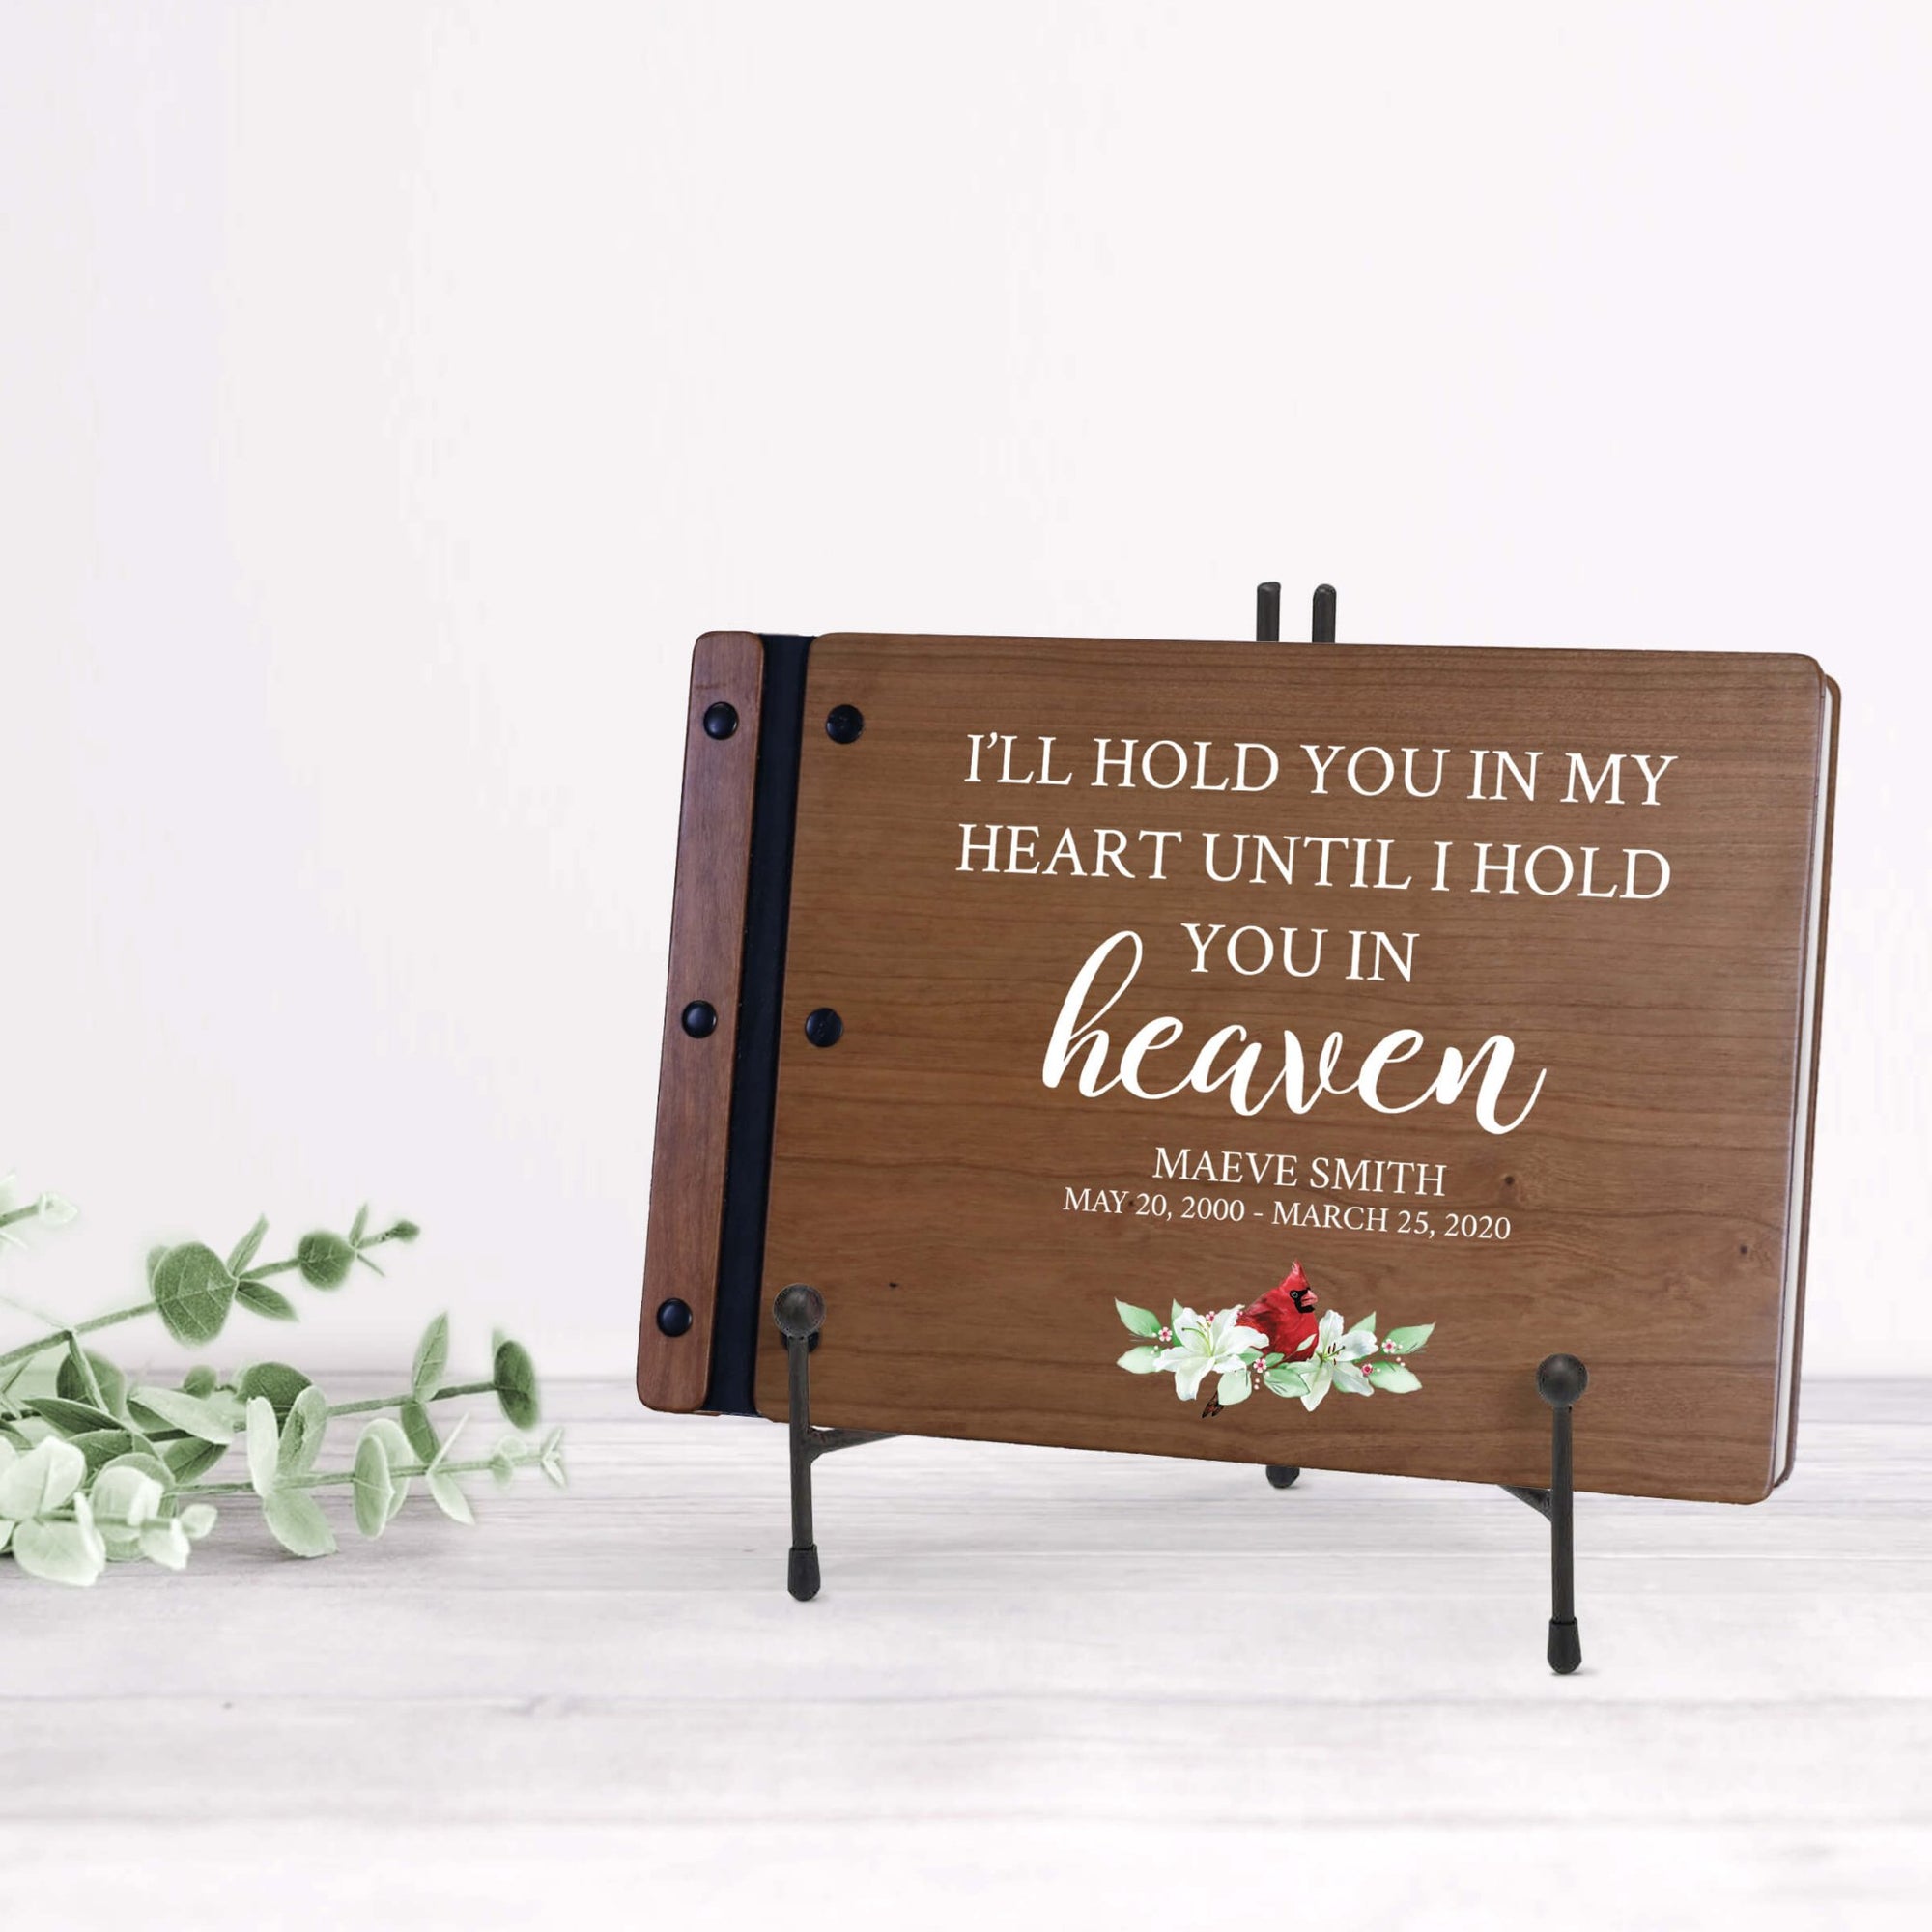 Personalized Funeral Wooden Guestbook for Memorial Service - I’ll Hold You In My Heart - LifeSong Milestones